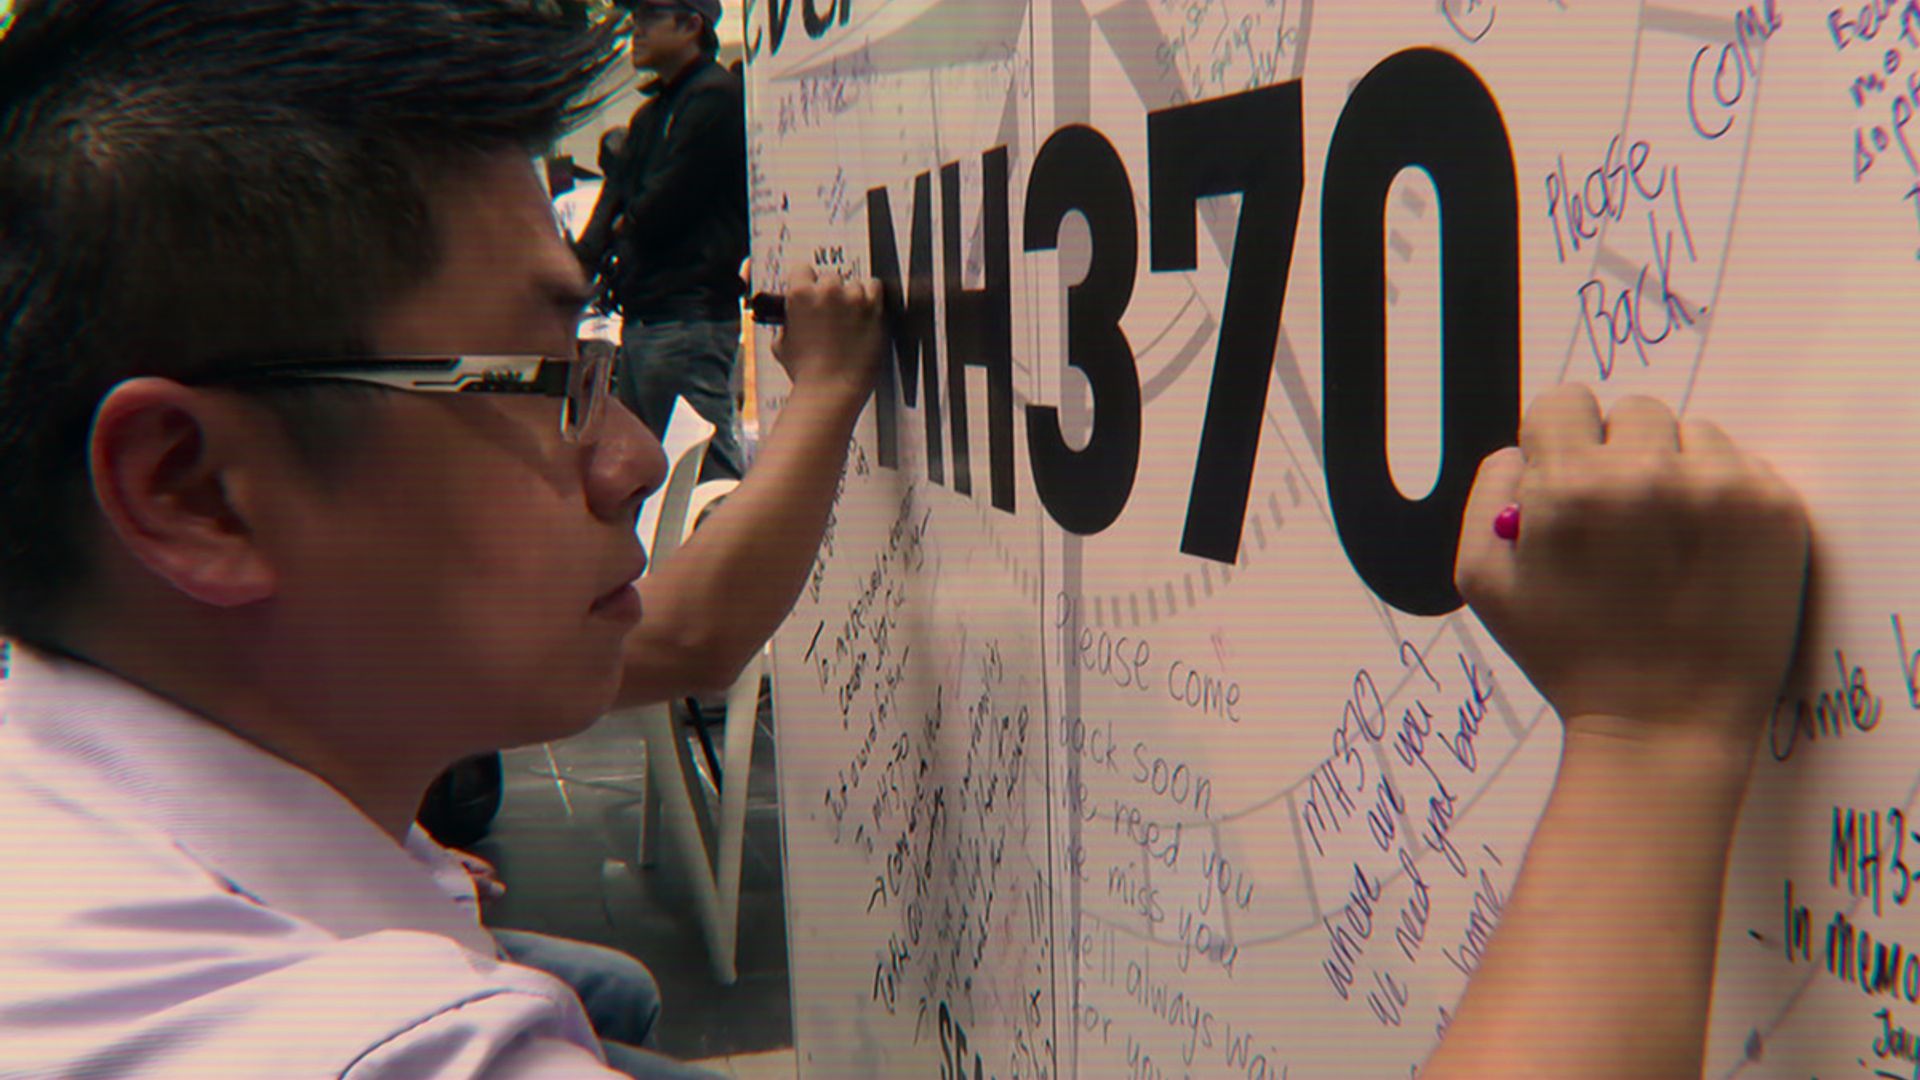 MH370: The Plane that Disappeared – the three major theories explained